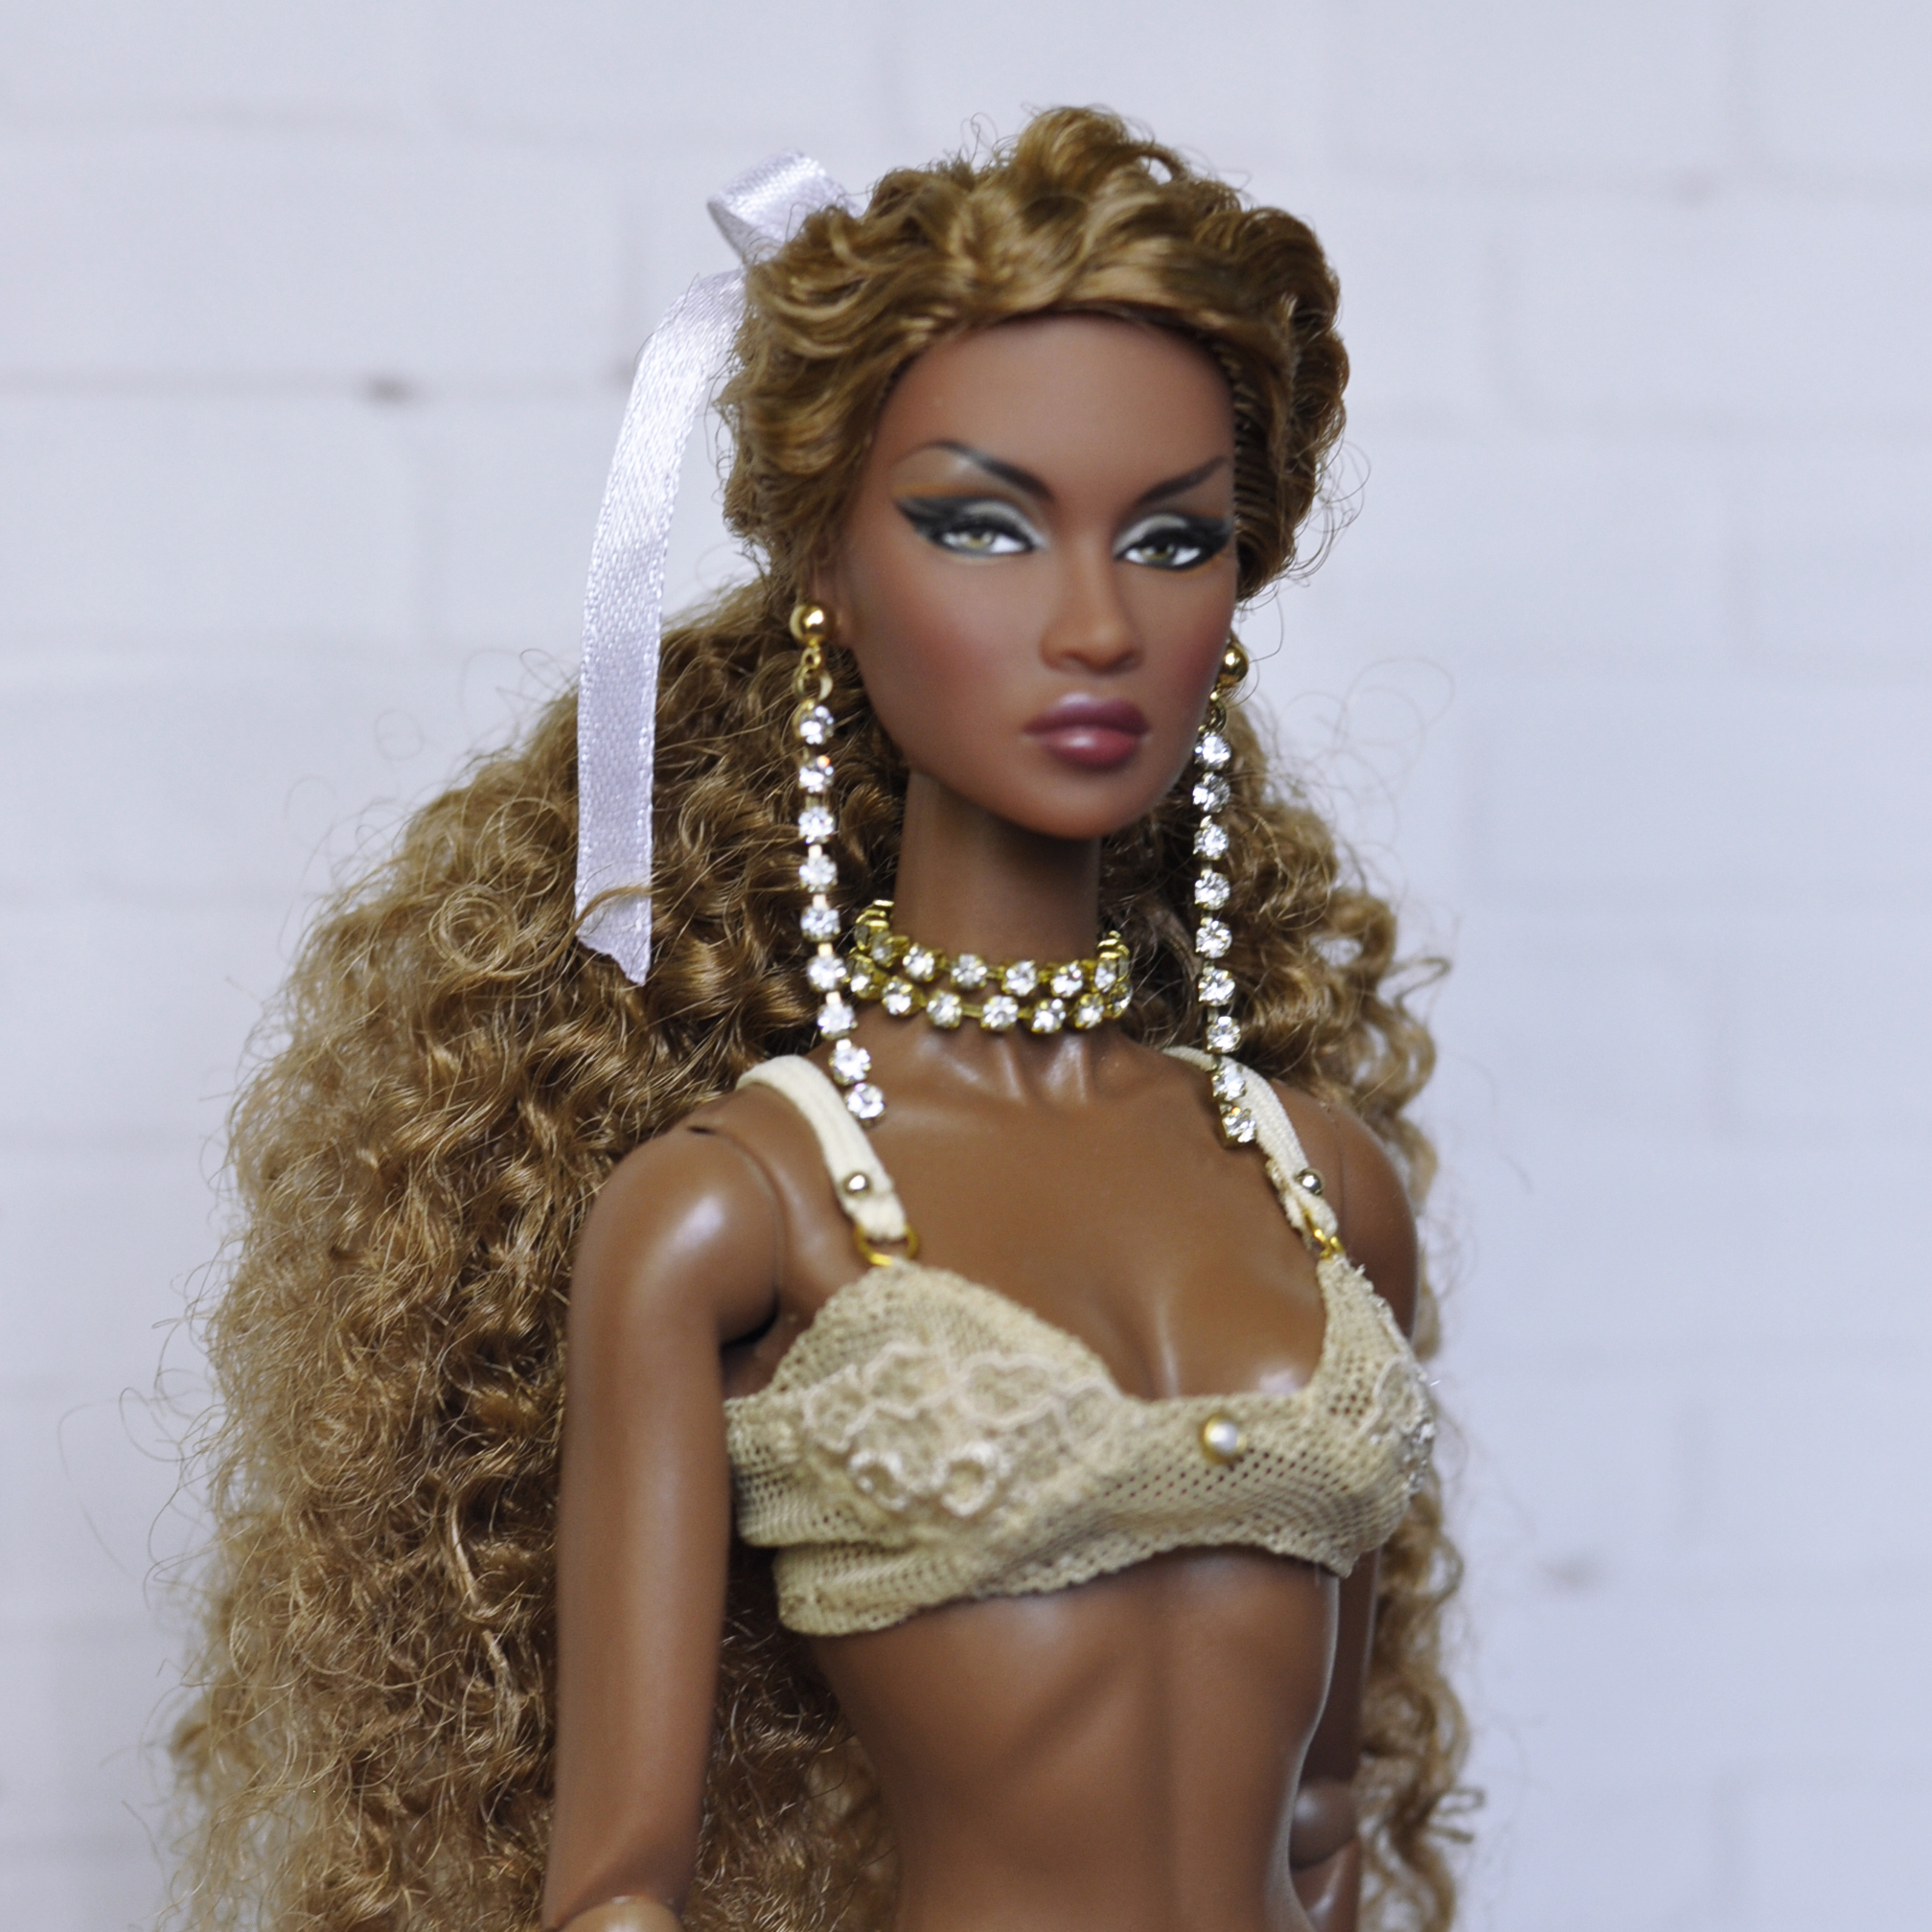 Pure Crystal Jewelry Set for 1/6 dolls Fashion Royalty Poppy Parker -  DailyDoll Shop